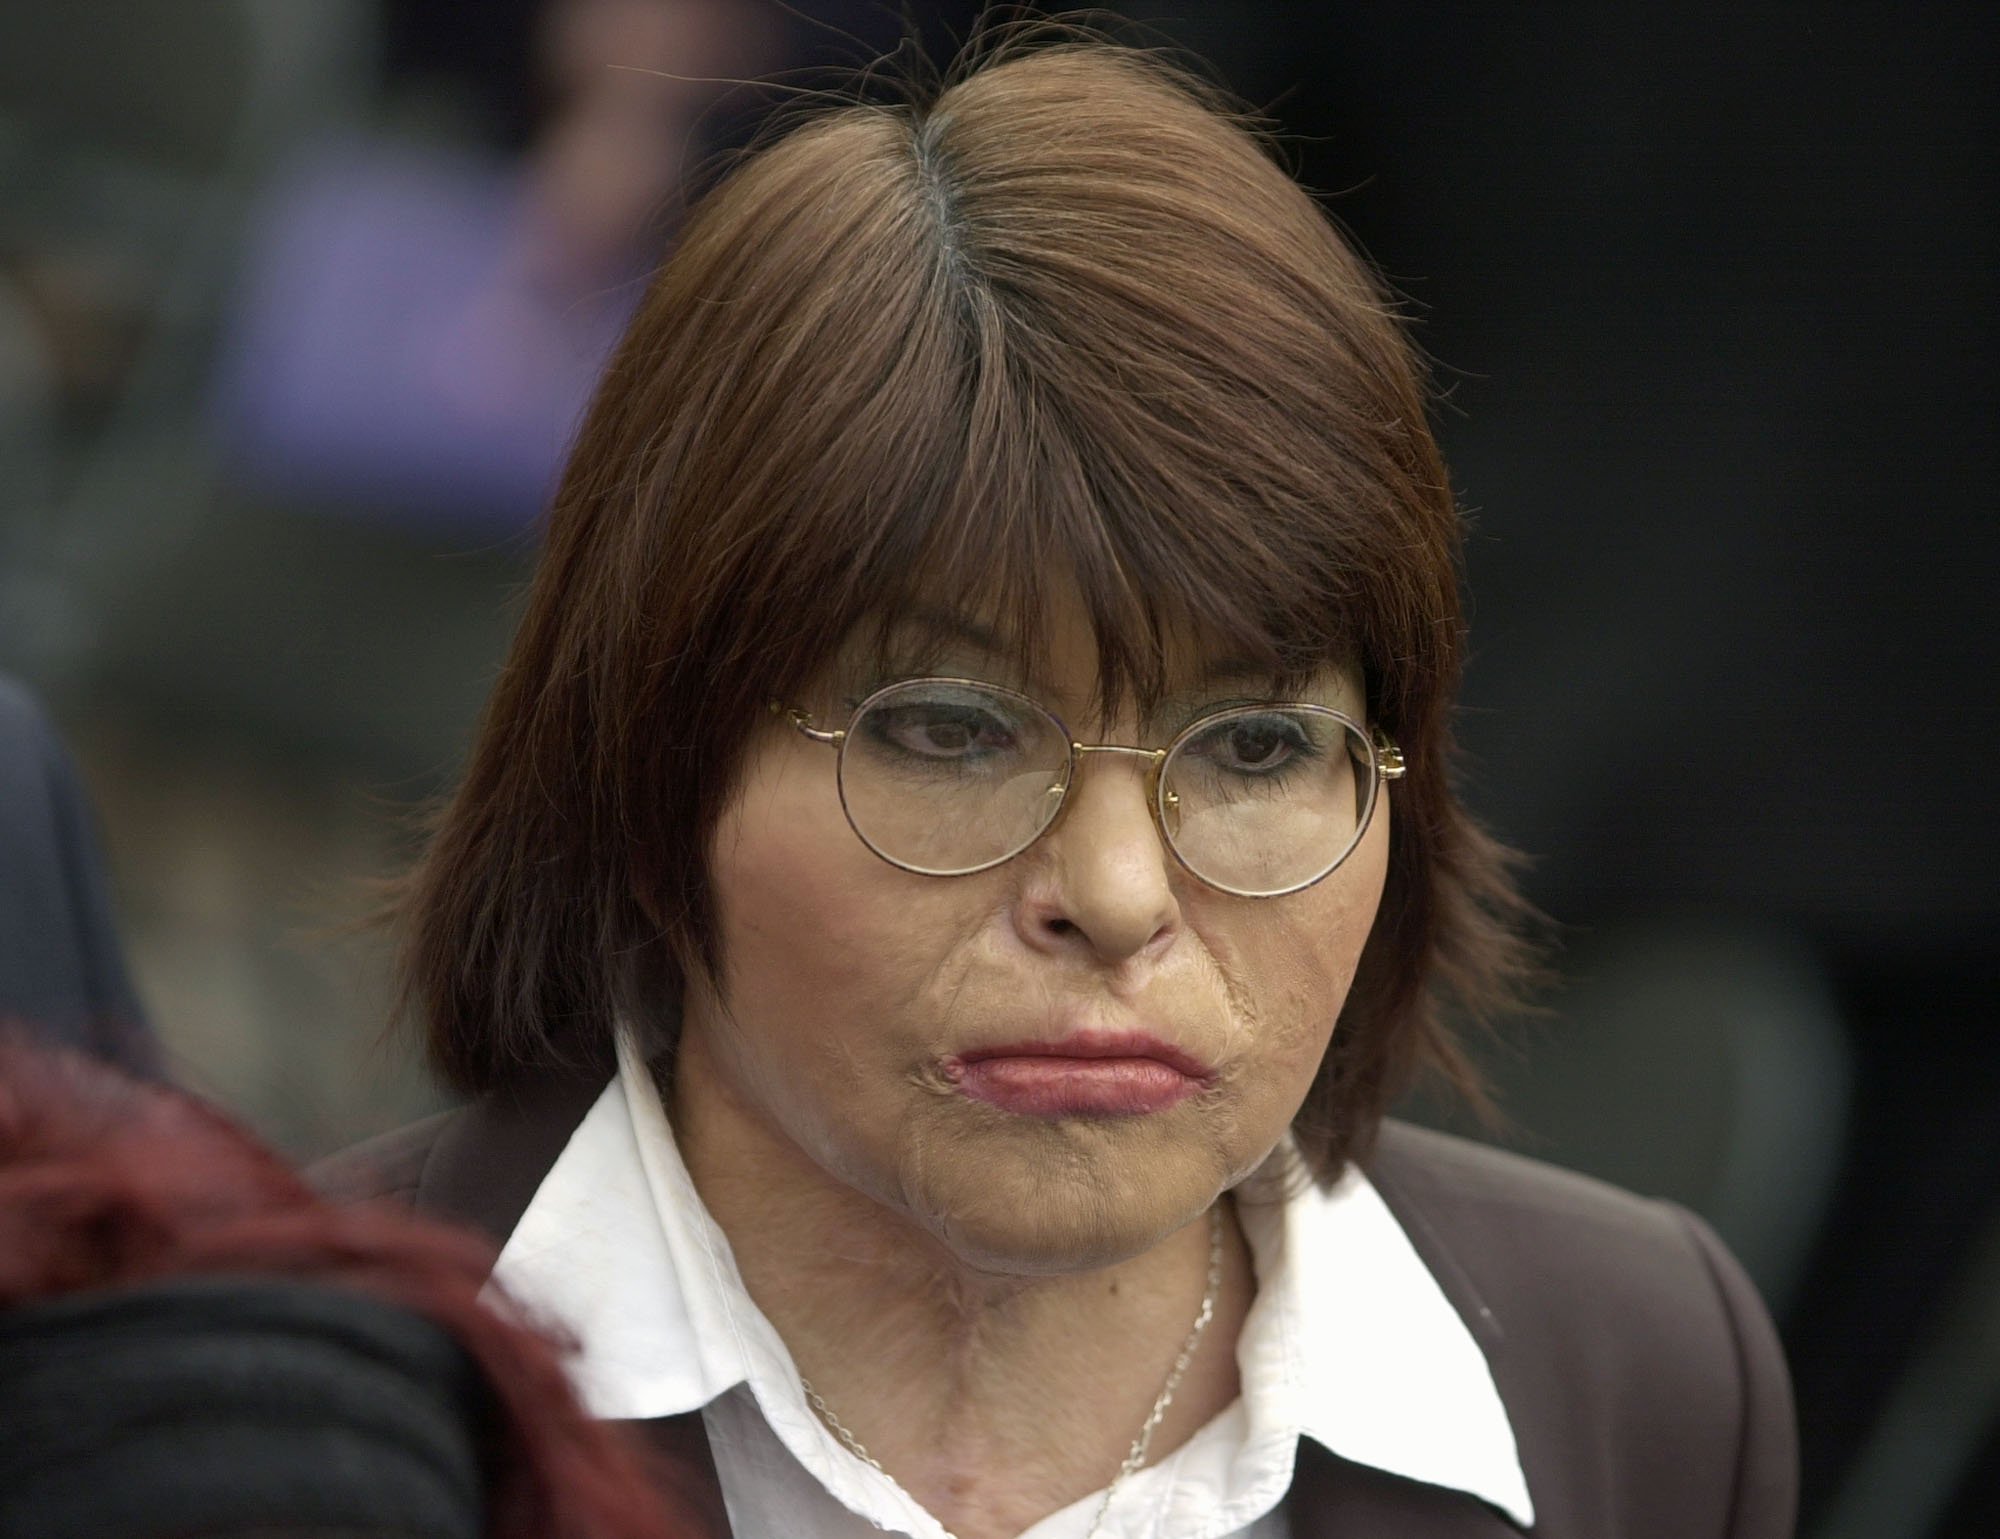 Chilean Carmen Gloria Quintana attends a ceremony marking the 30th anniversary of the Sept. 11 military coup lead by Gen. Augusto Pinochet at the government palace La Moneda, in Santiago on Sept. 11, 2003.